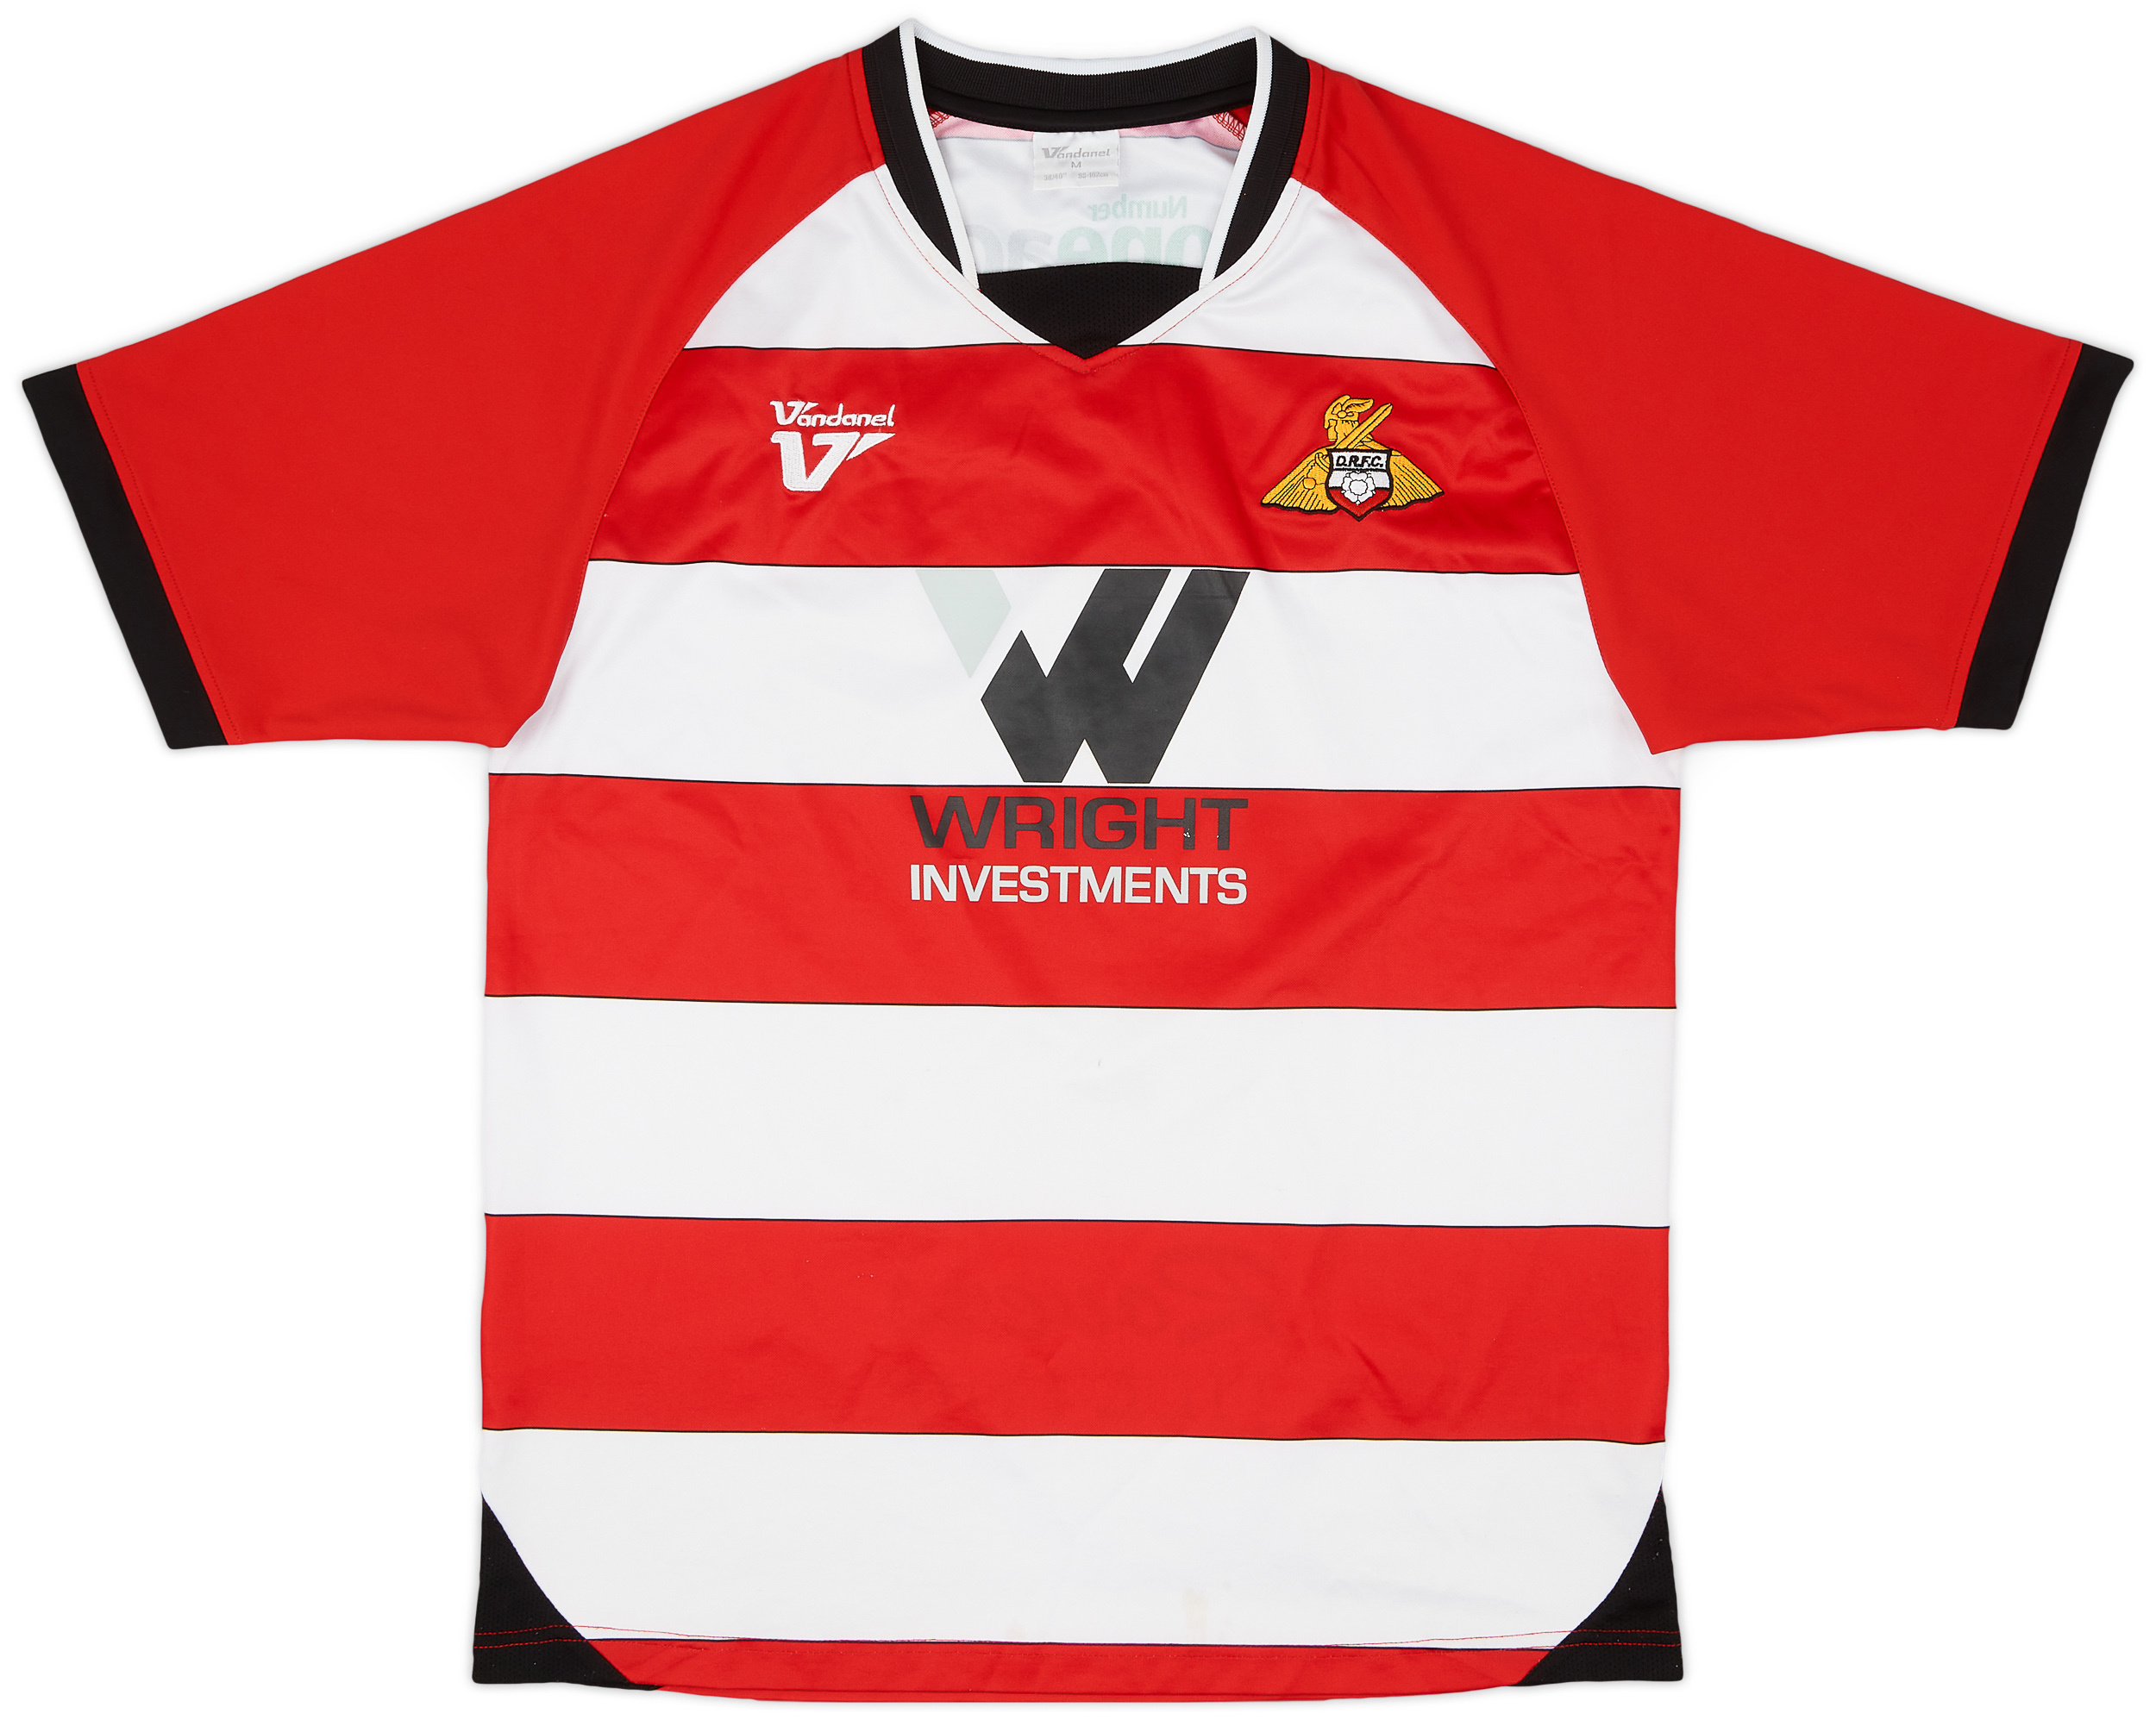 2009-10 Doncaster Rovers Home Shirt - 8/10 - ()